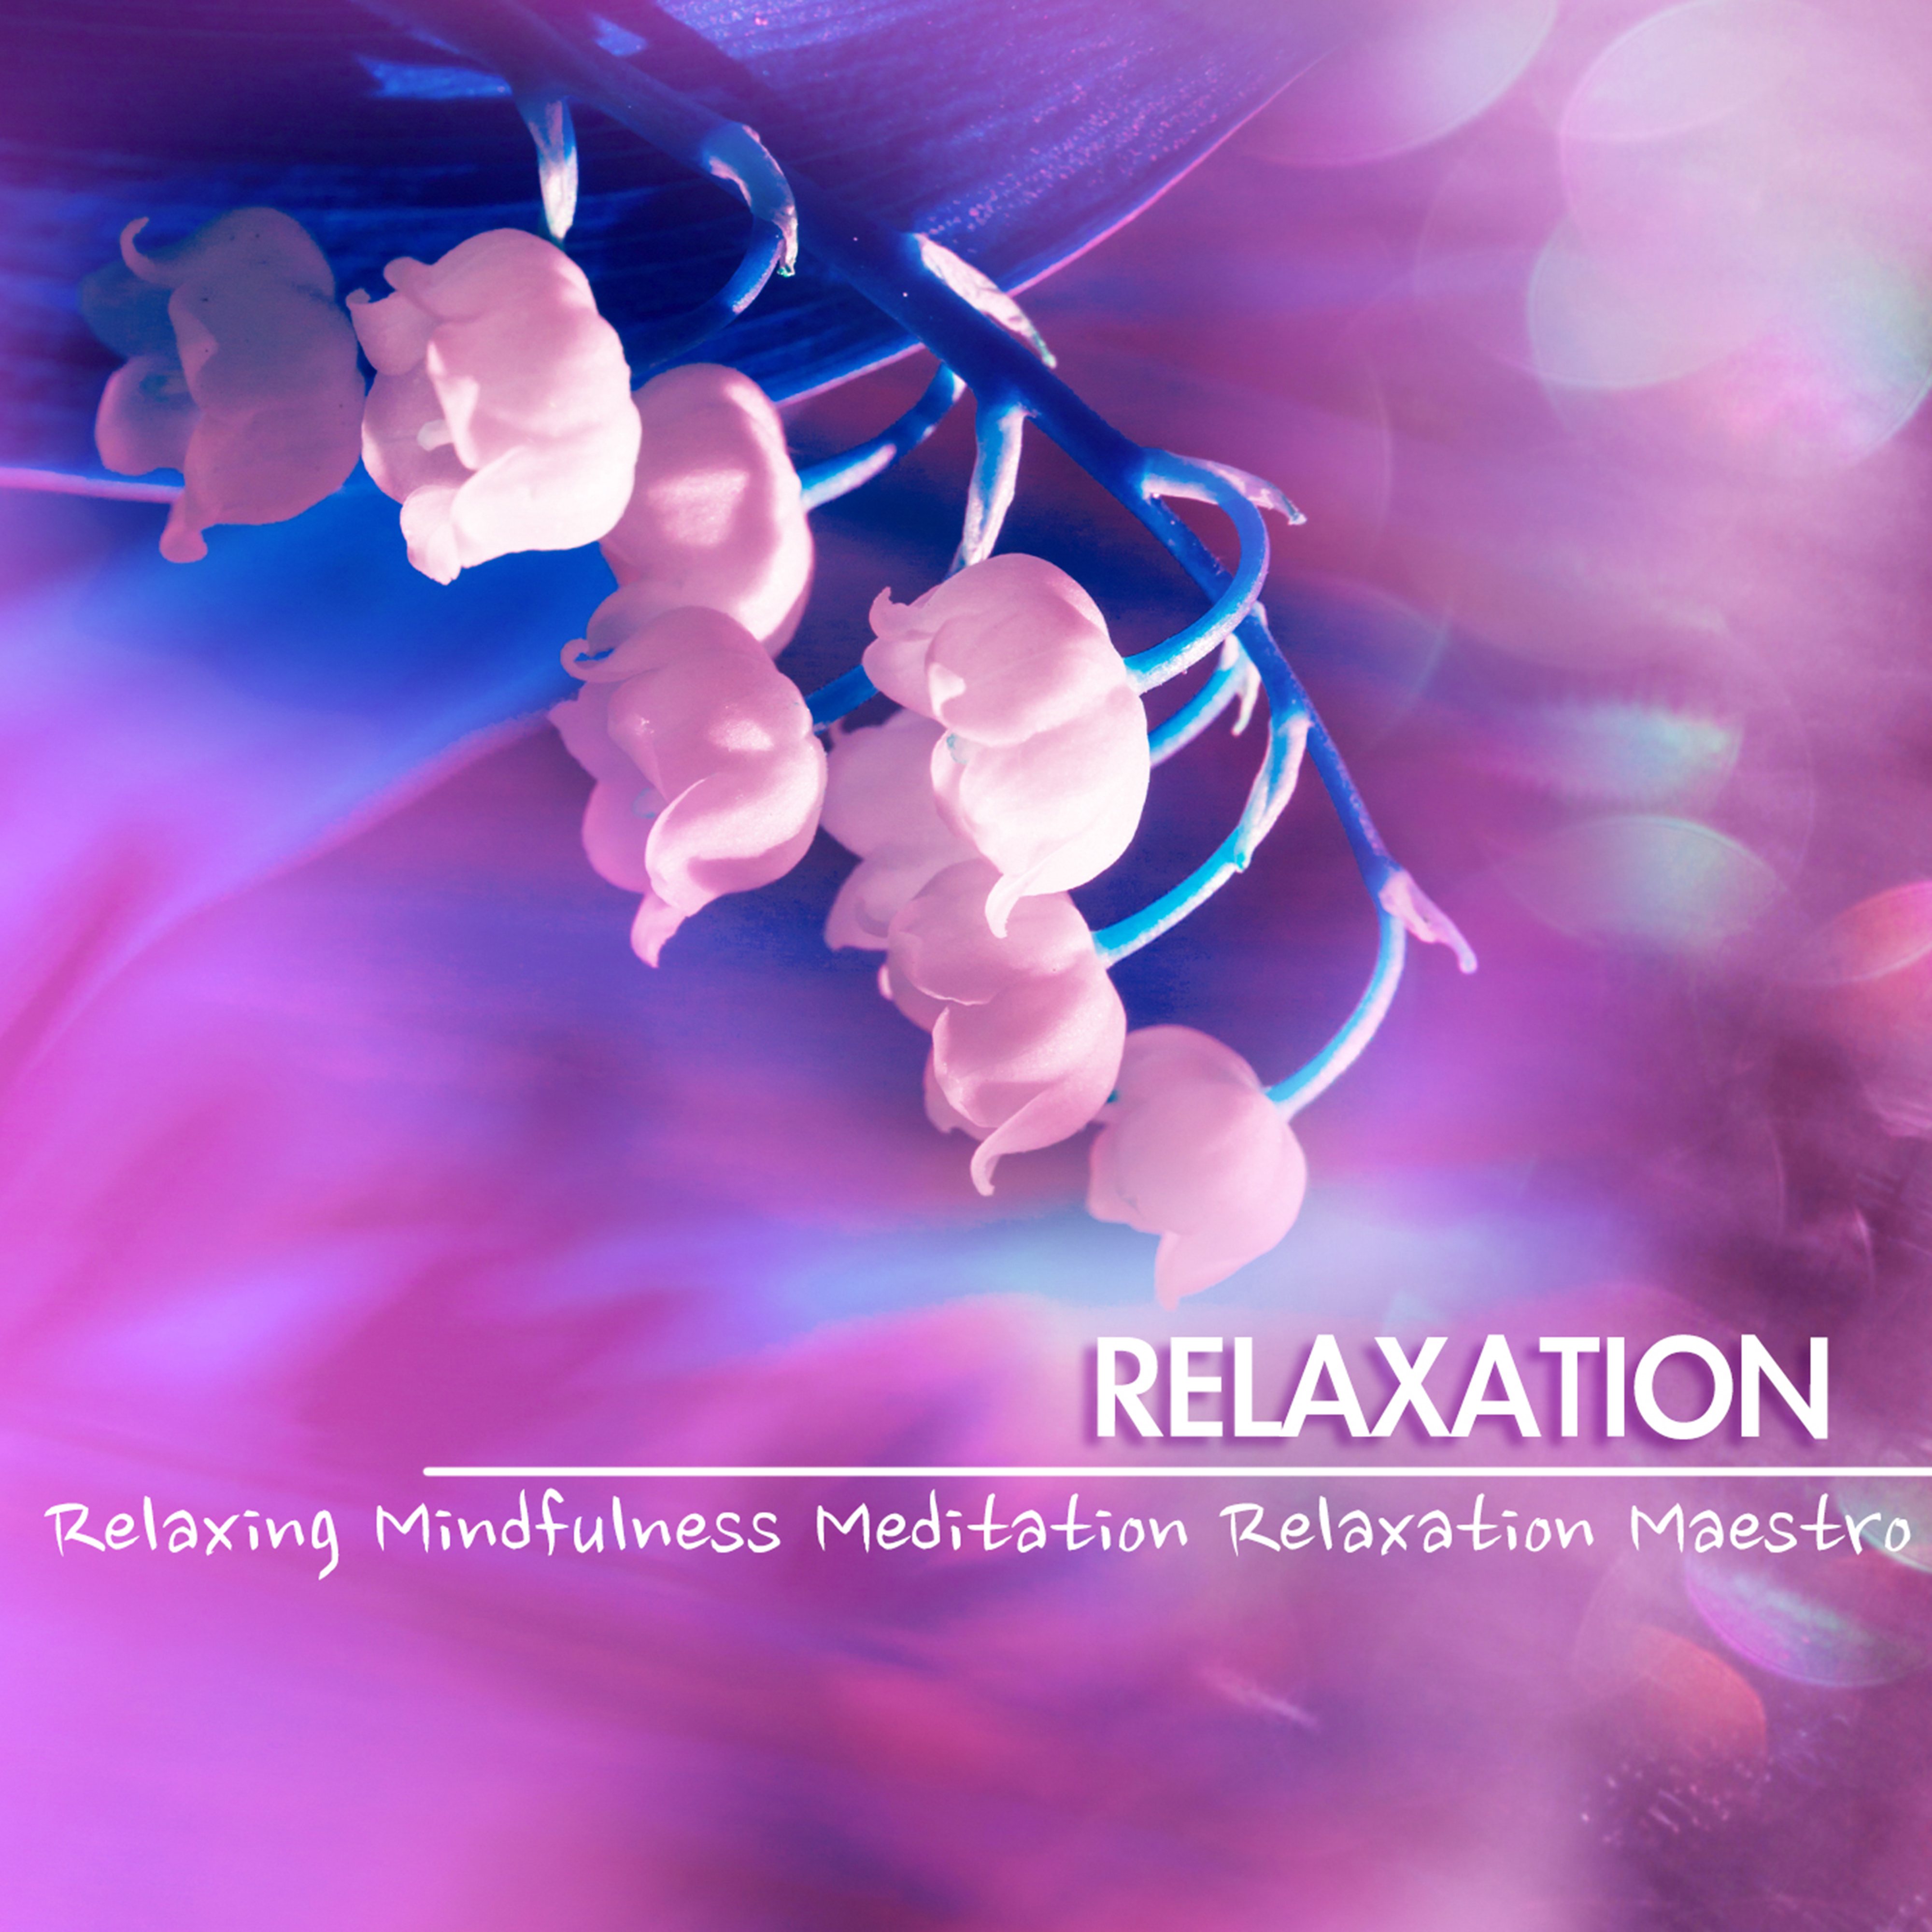 Relax Melodies